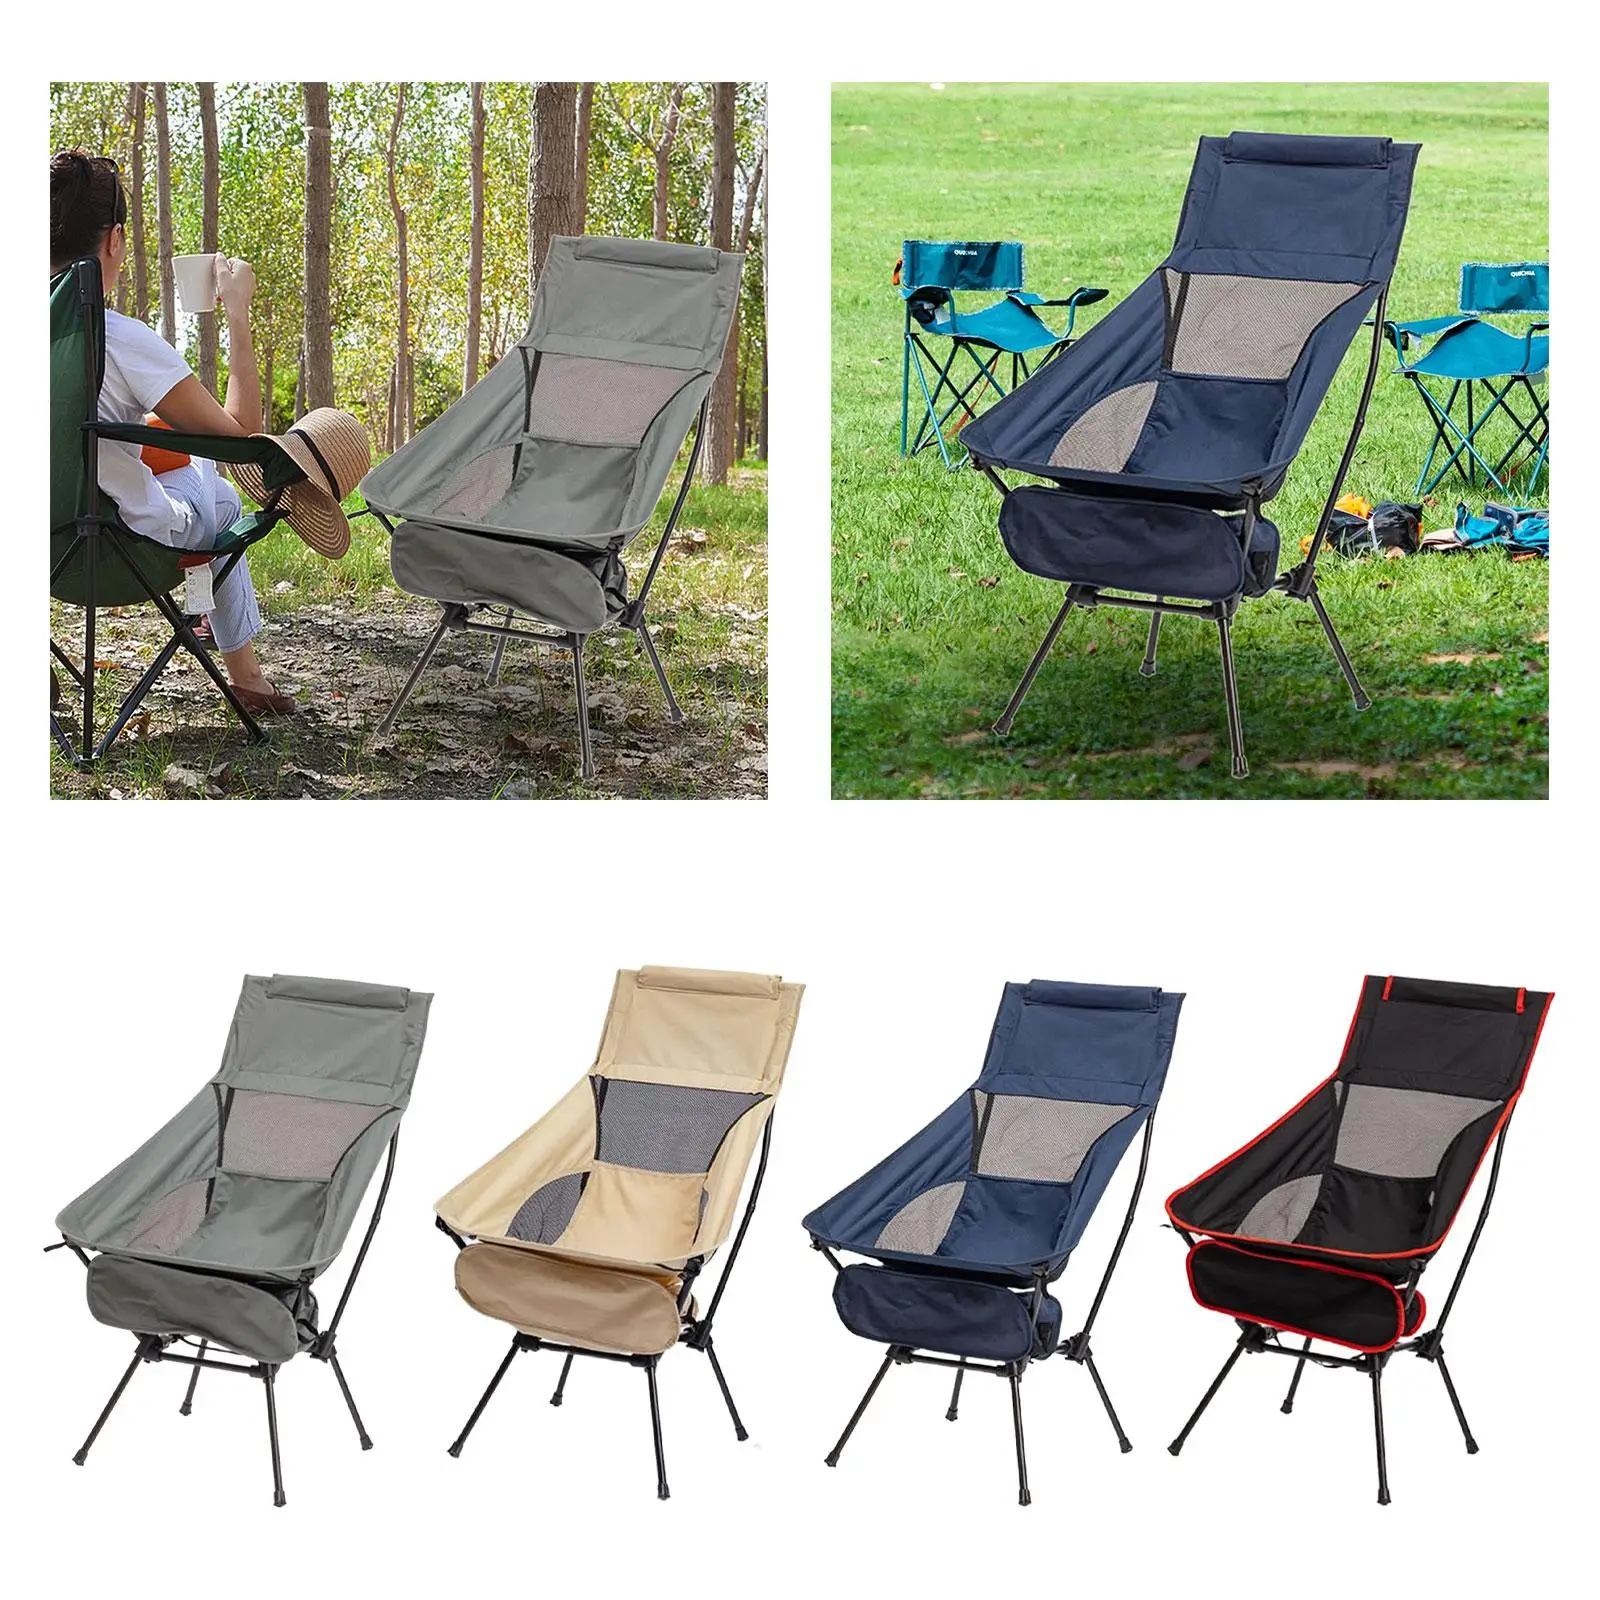 Collapsible Camping Chair Telescopic Stool Beach Chair Compact Portable Moon